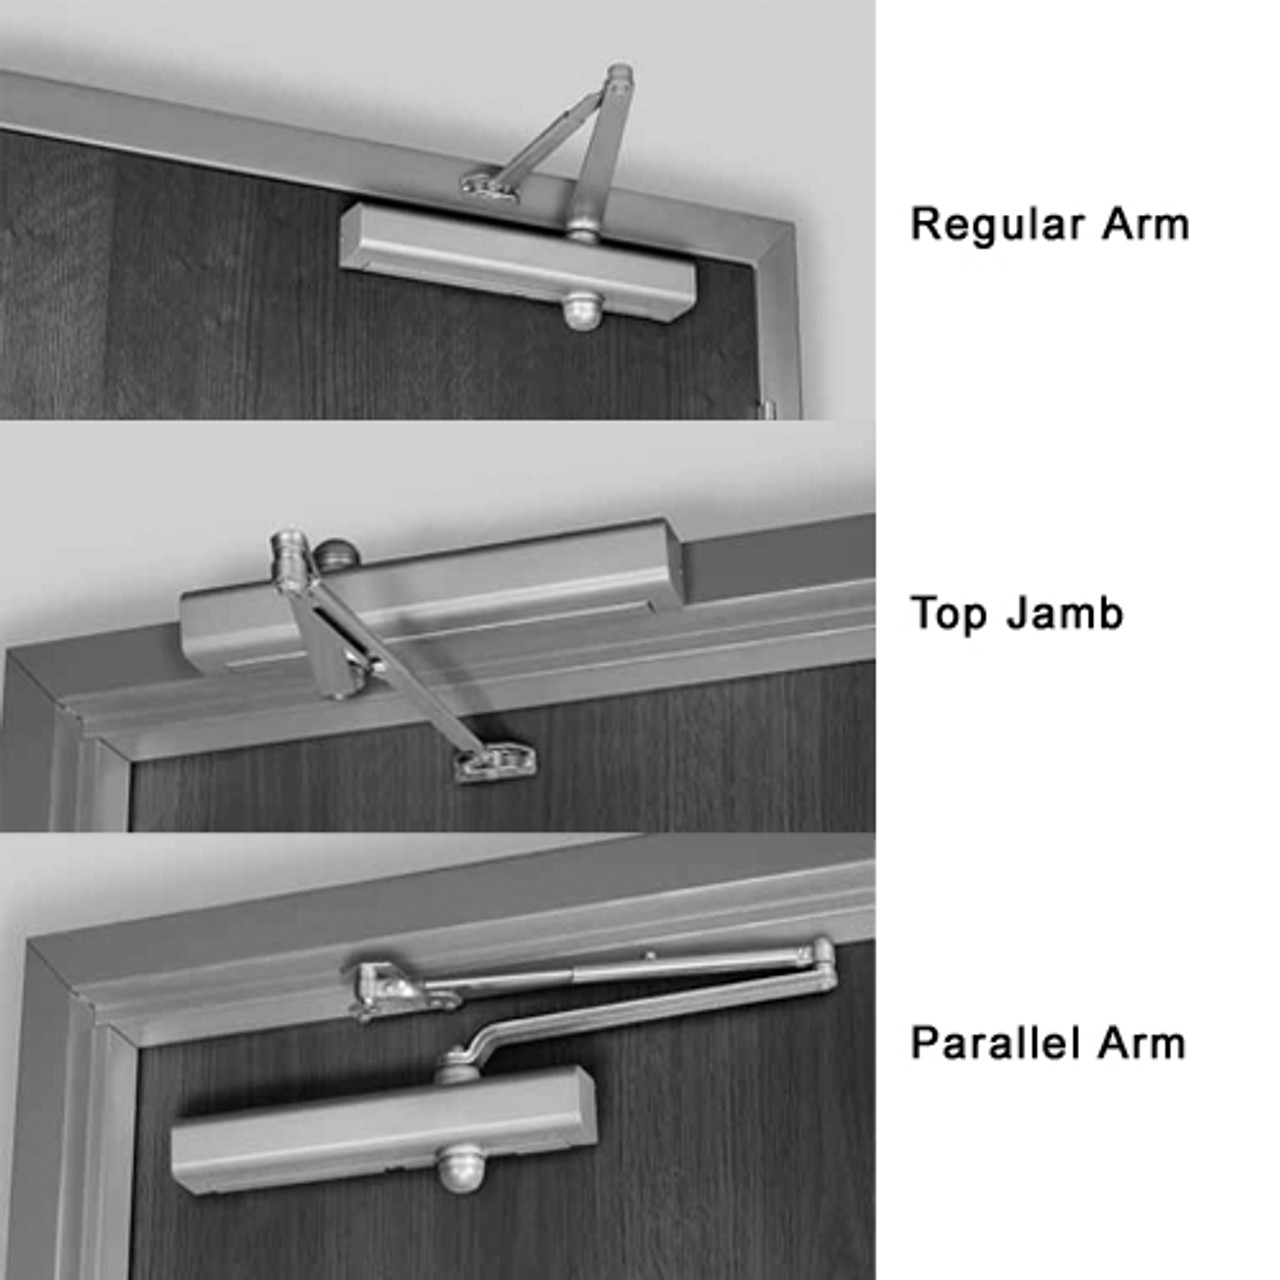 8301H-693 Norton 8000 Series Hold Open Door Closers with Regular Parallel and Top Jamb to 2-3/4 inch Reveal in Black Finish